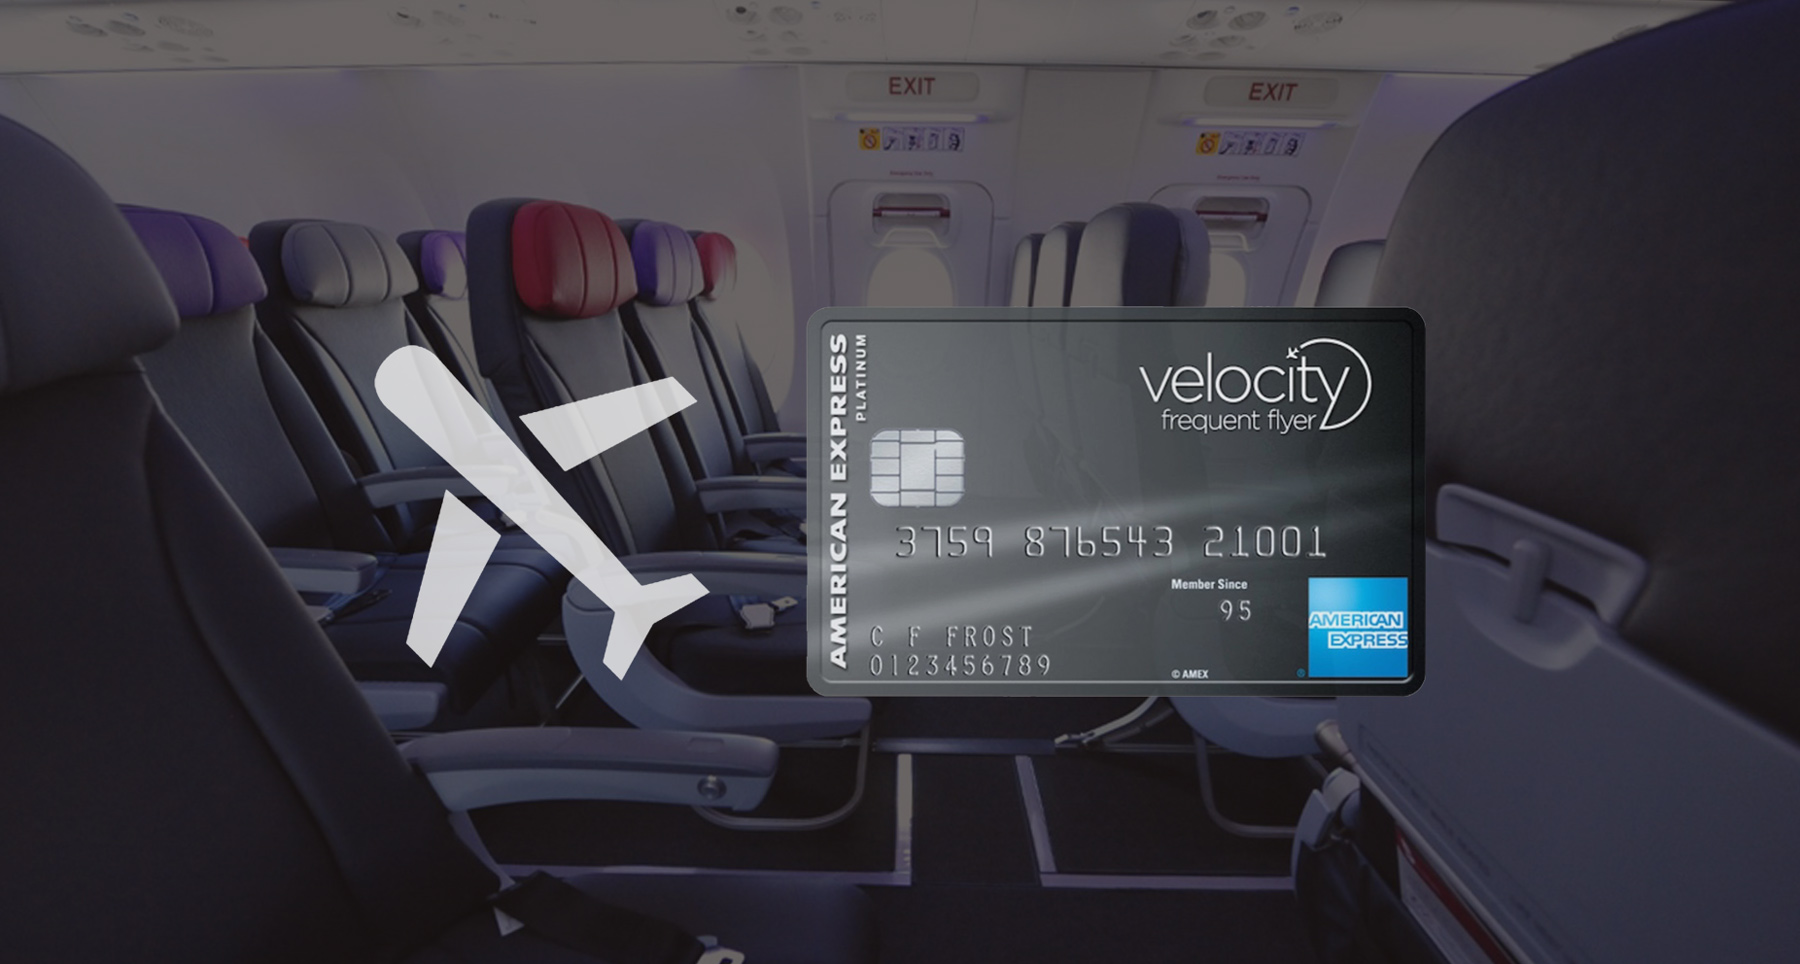 unraveling-the-american-express-velocity-platinum-card-know-more